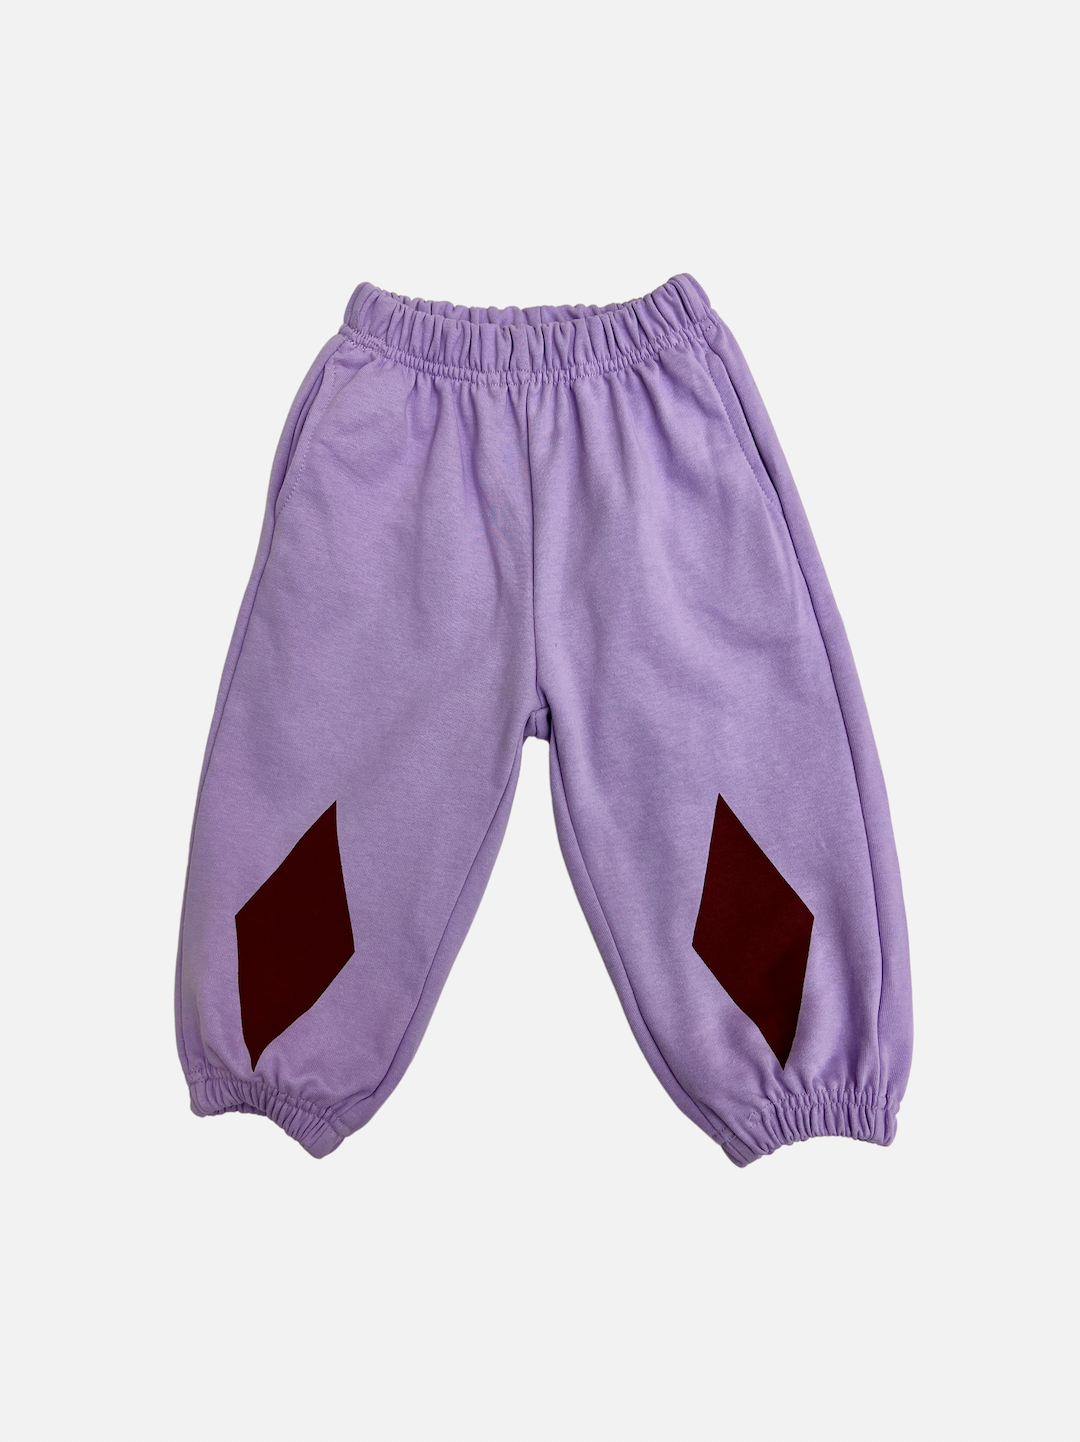 A pair of kids' sweatpants in pale purple with dark red diamond patches at the knees